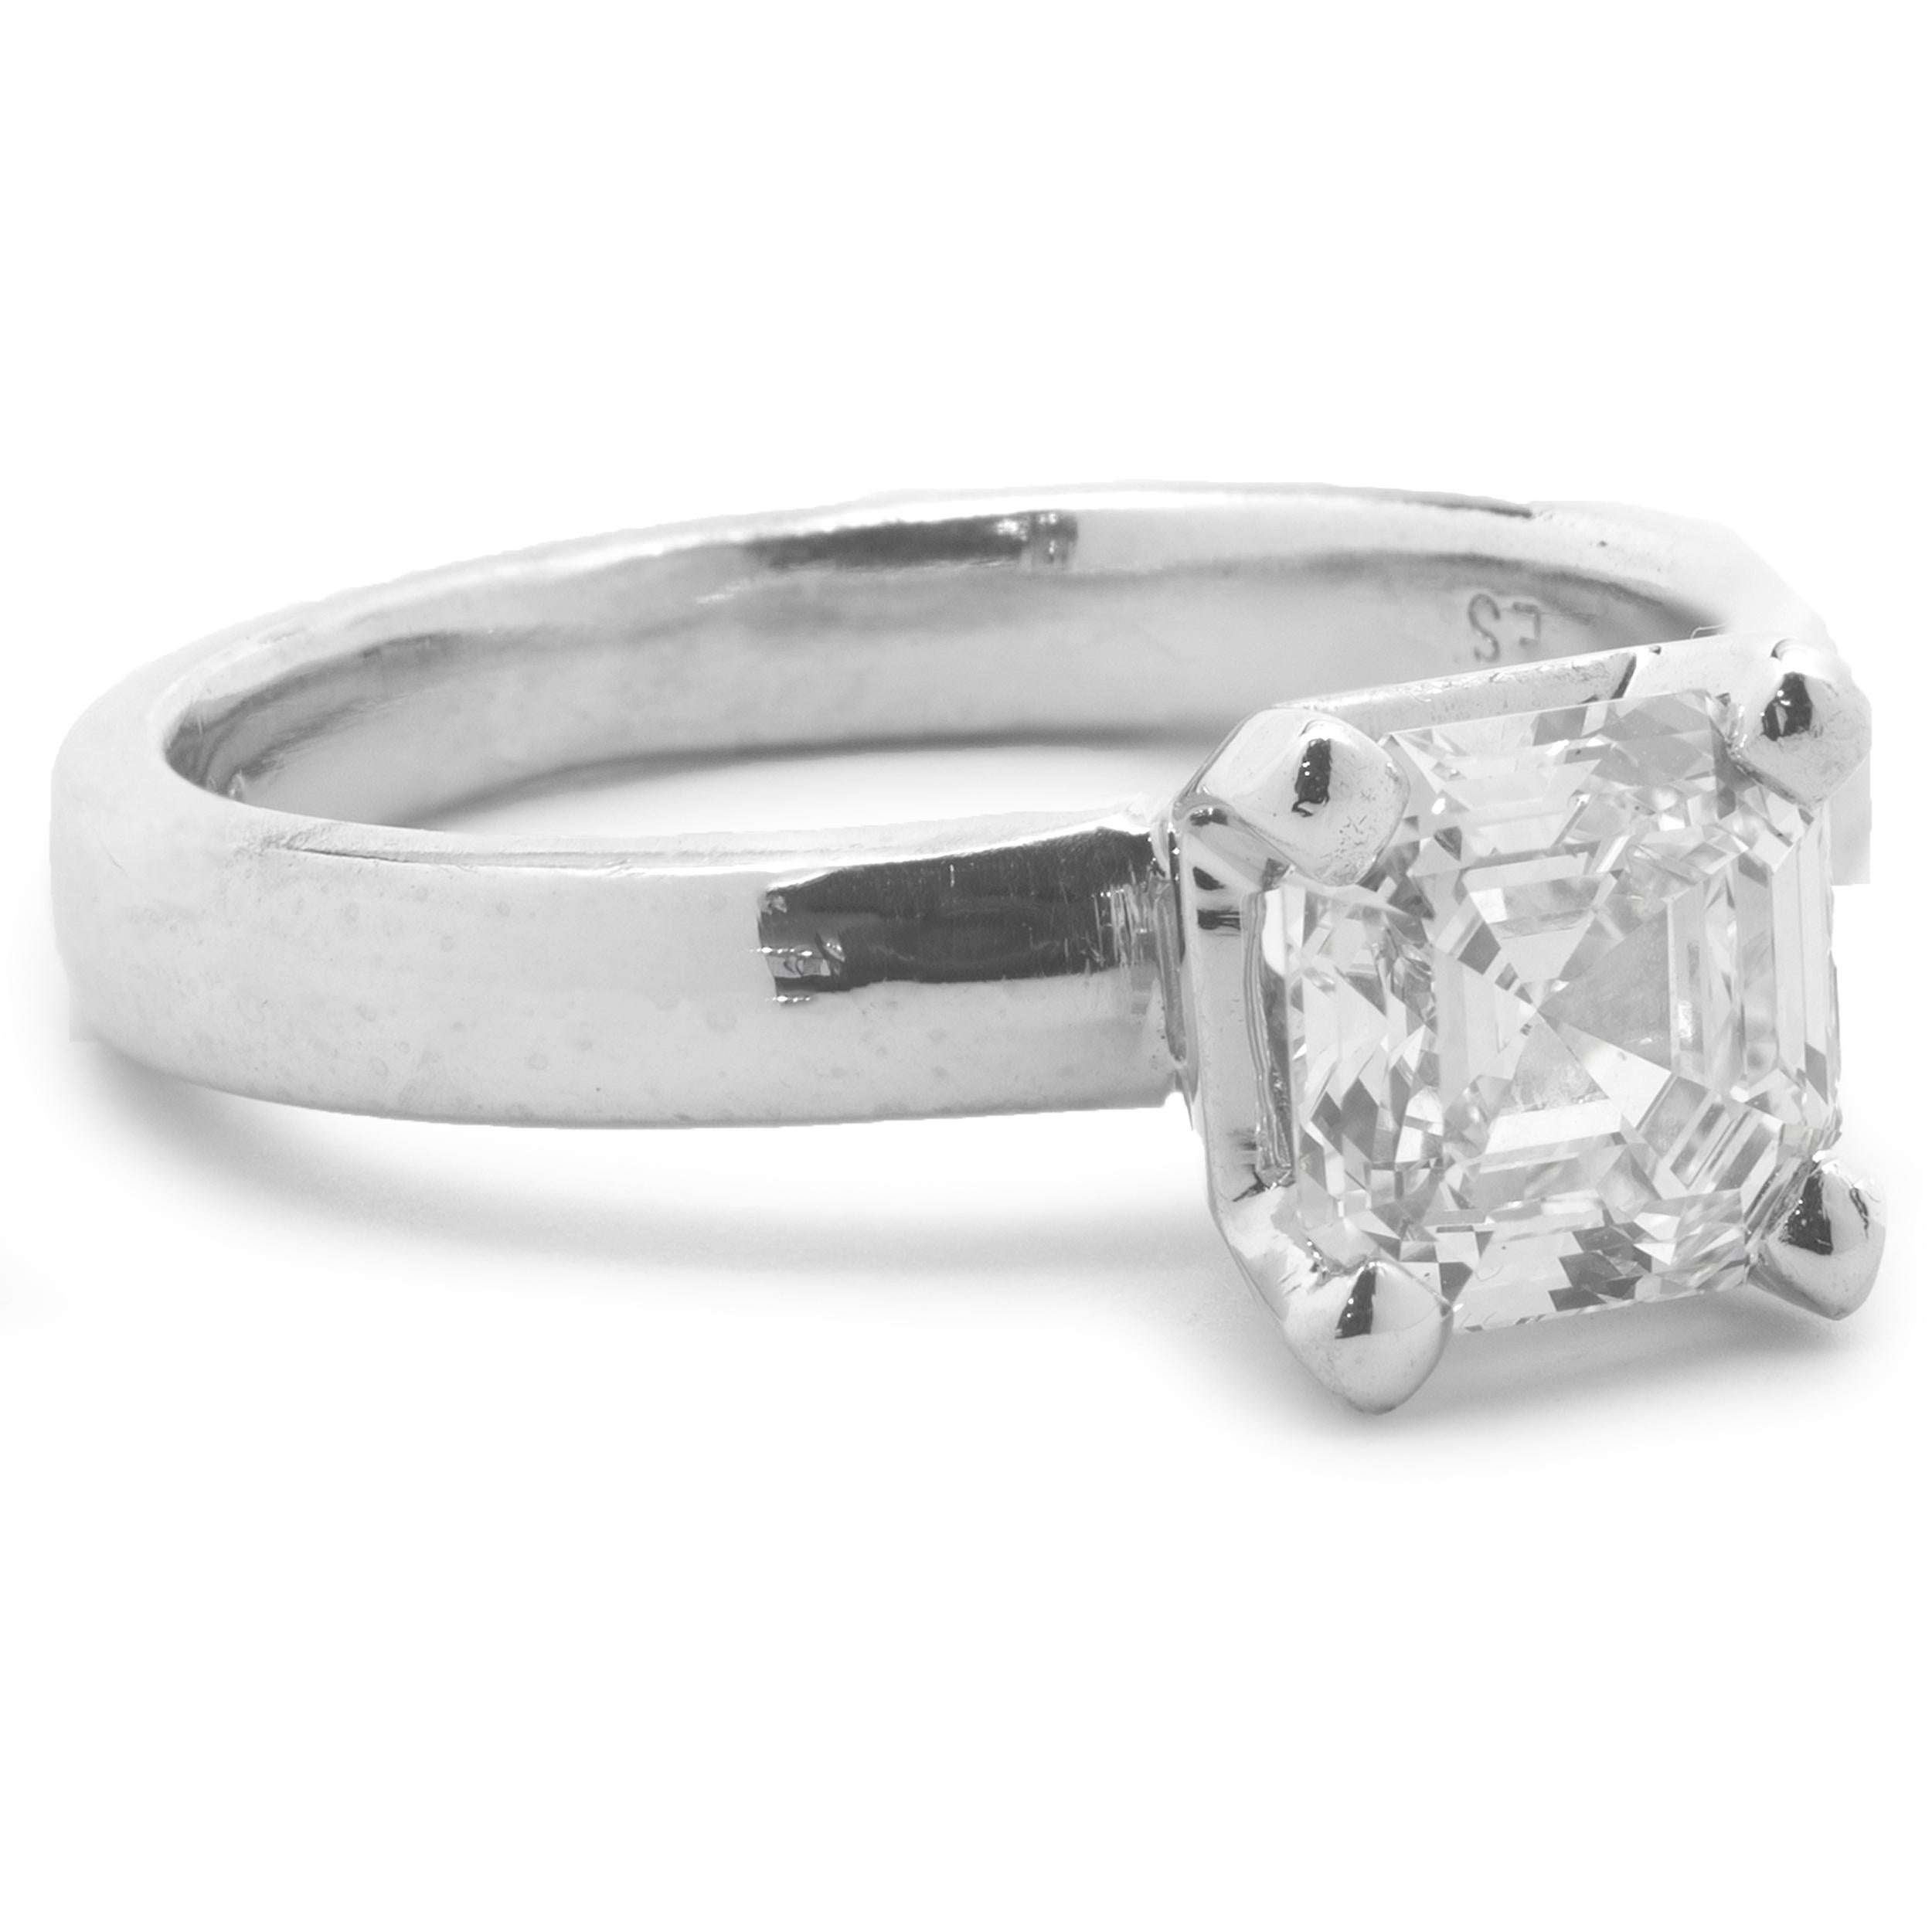 Designer: custom
Material: platinum 
Diamond: 1 square emerald cut = 1.03ct
Color: I
Clarity: VS2
GIA: 14921143
Ring Size: 4.5 (please allow up to 2 additional business days for sizing requests)
Dimensions: ring top measures 6.75mm wide
Weight: 5.61